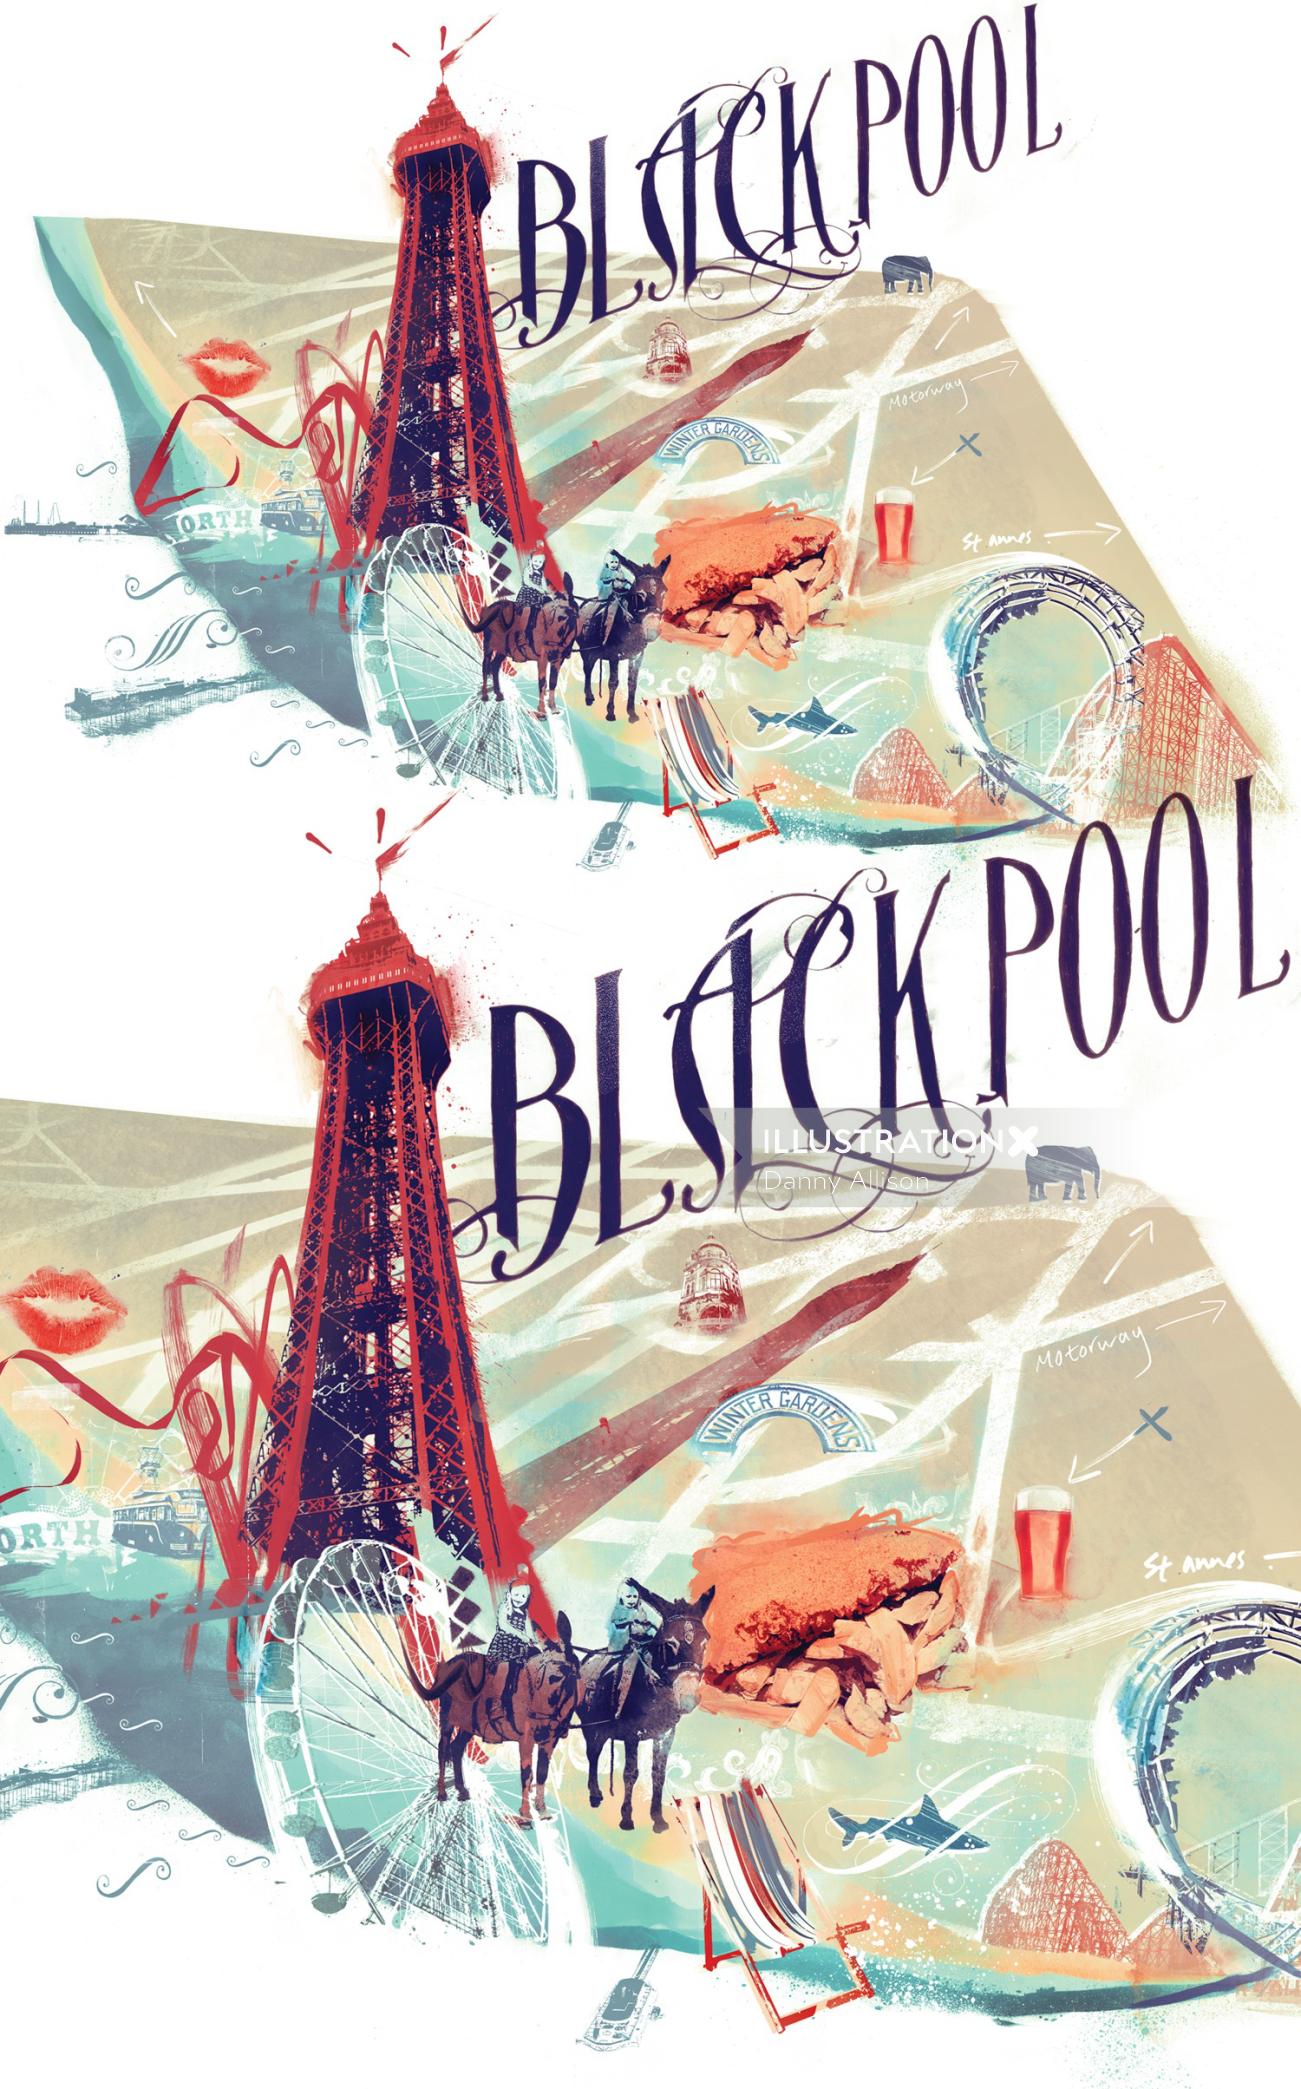 blackpool map infographics info donkey tower fisn and chips beer kiss zoo pleasure beach